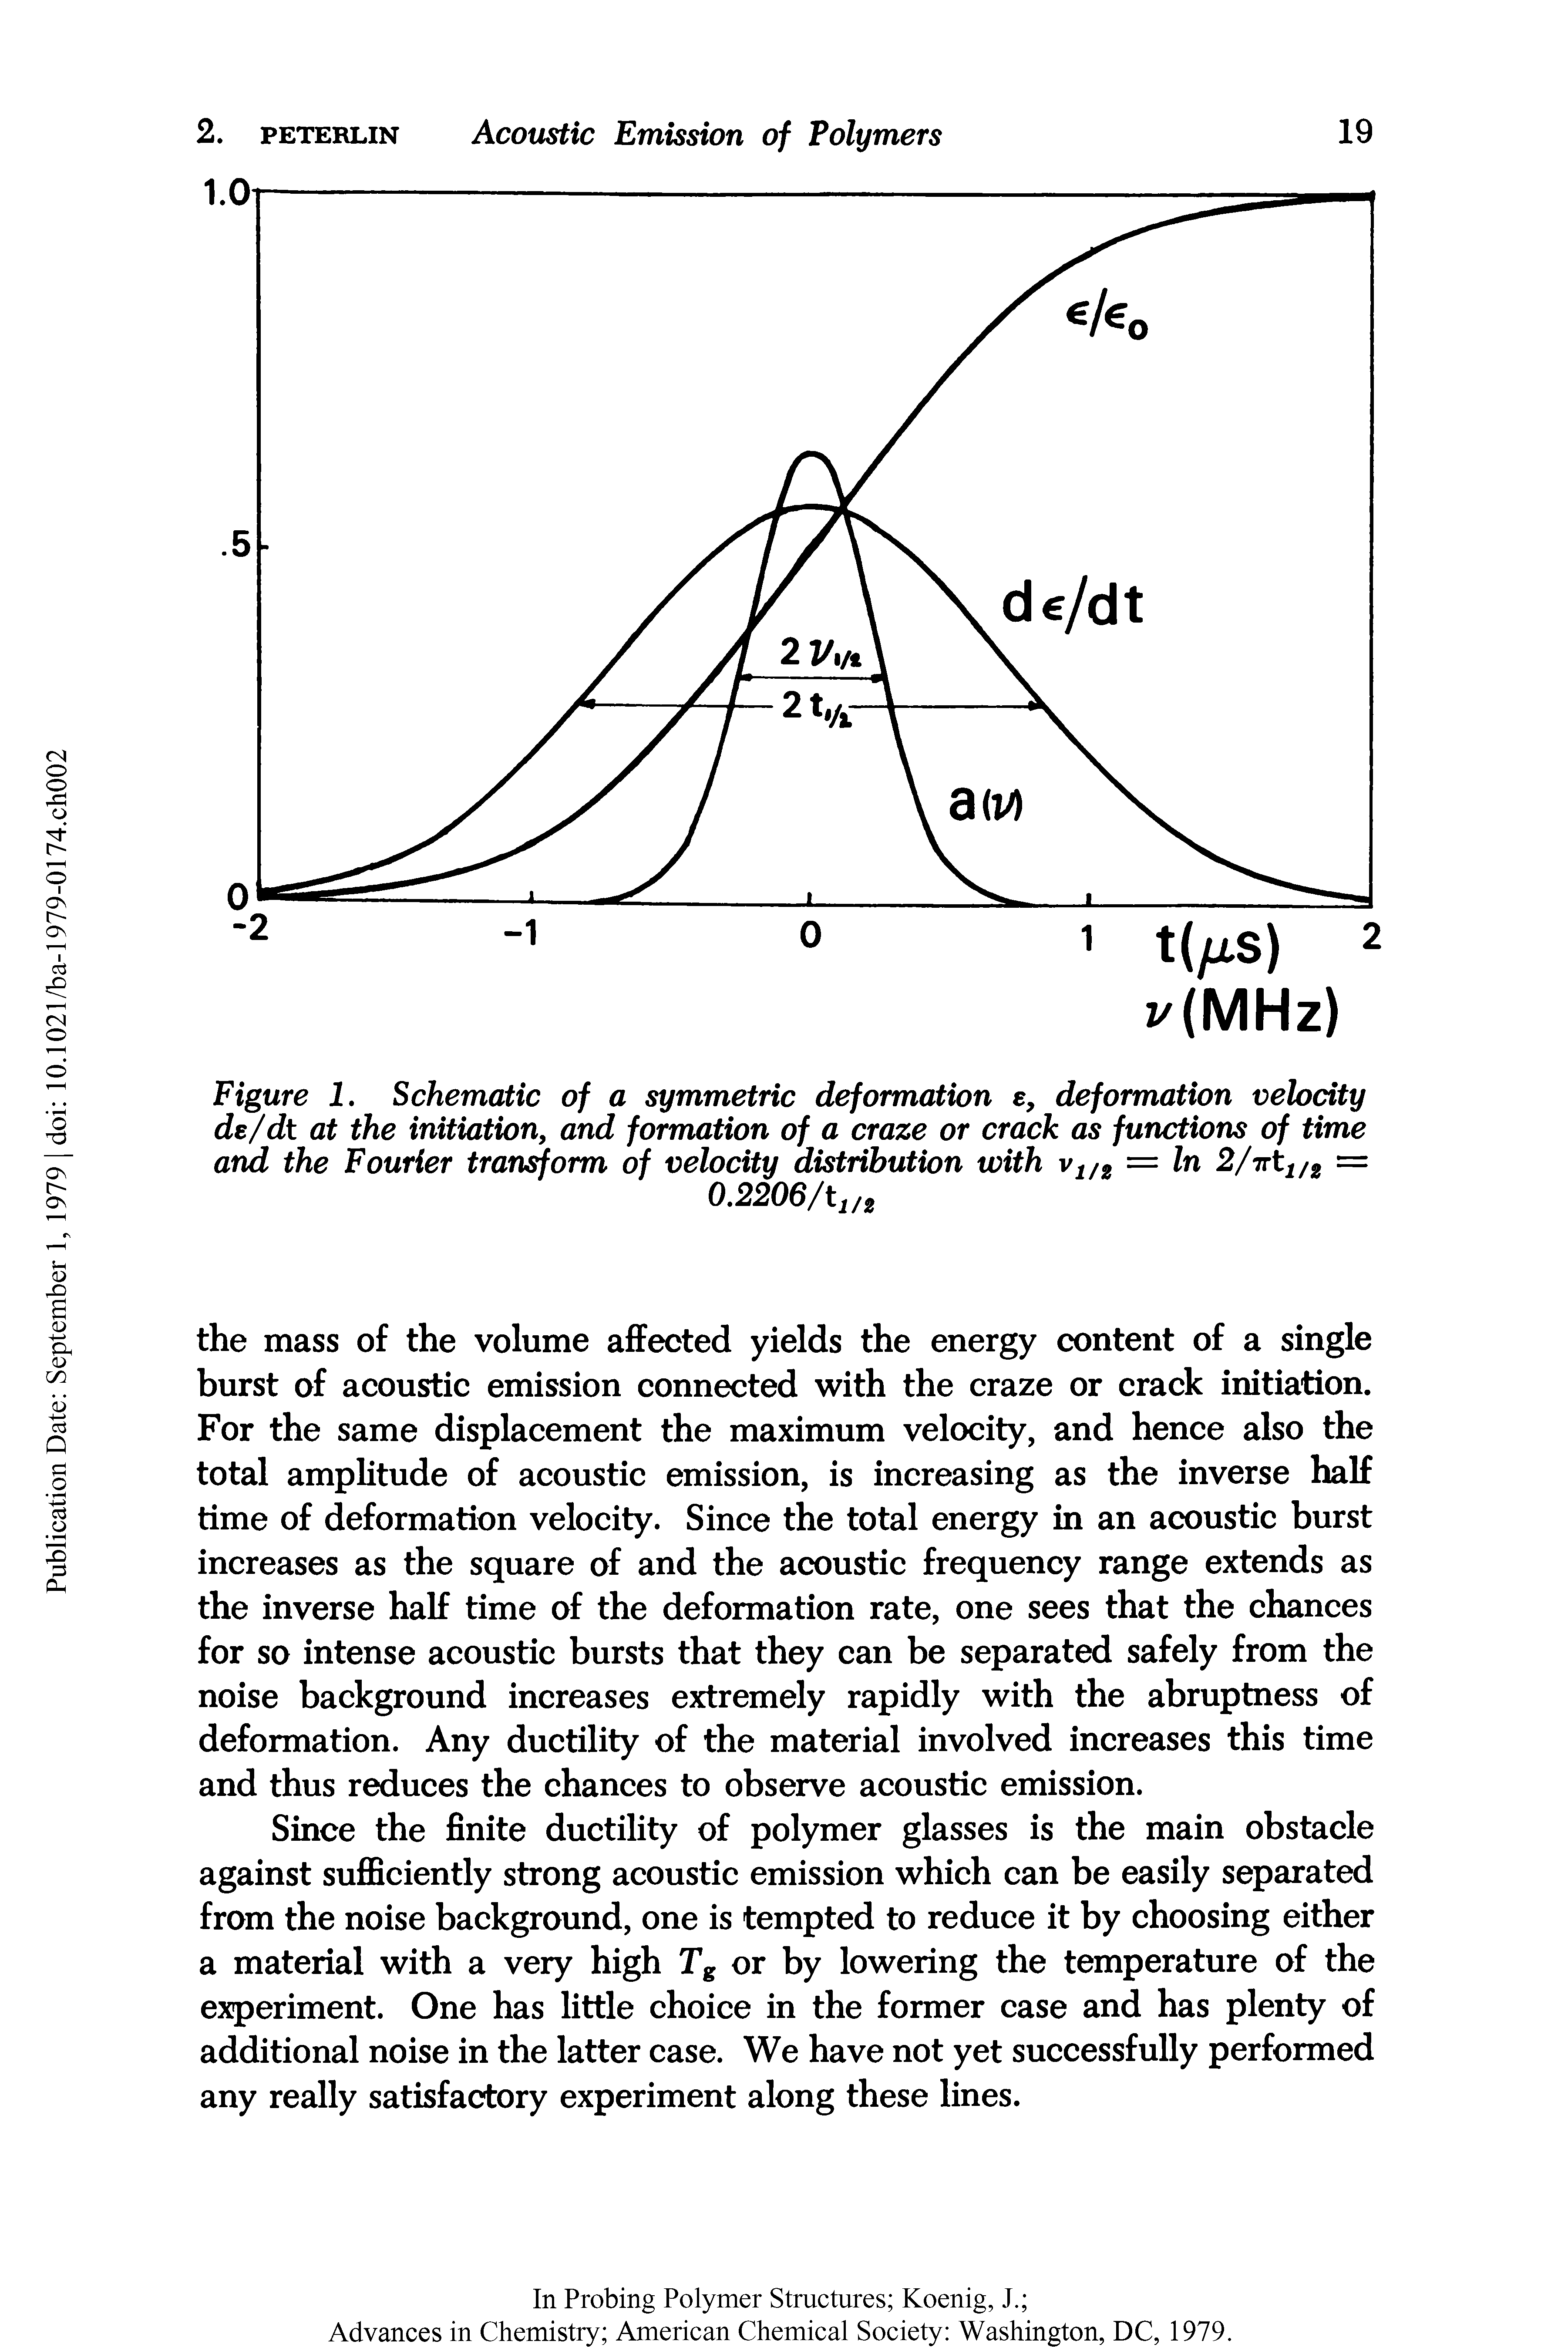 Figure 1. Schematic of a symmetric deformation e, deformation velocity de/dt at the initiation, and formation of a craze or crack as functions of time arid the Fourier transform of velocity distribution with = In 2/7rtj/2 =...